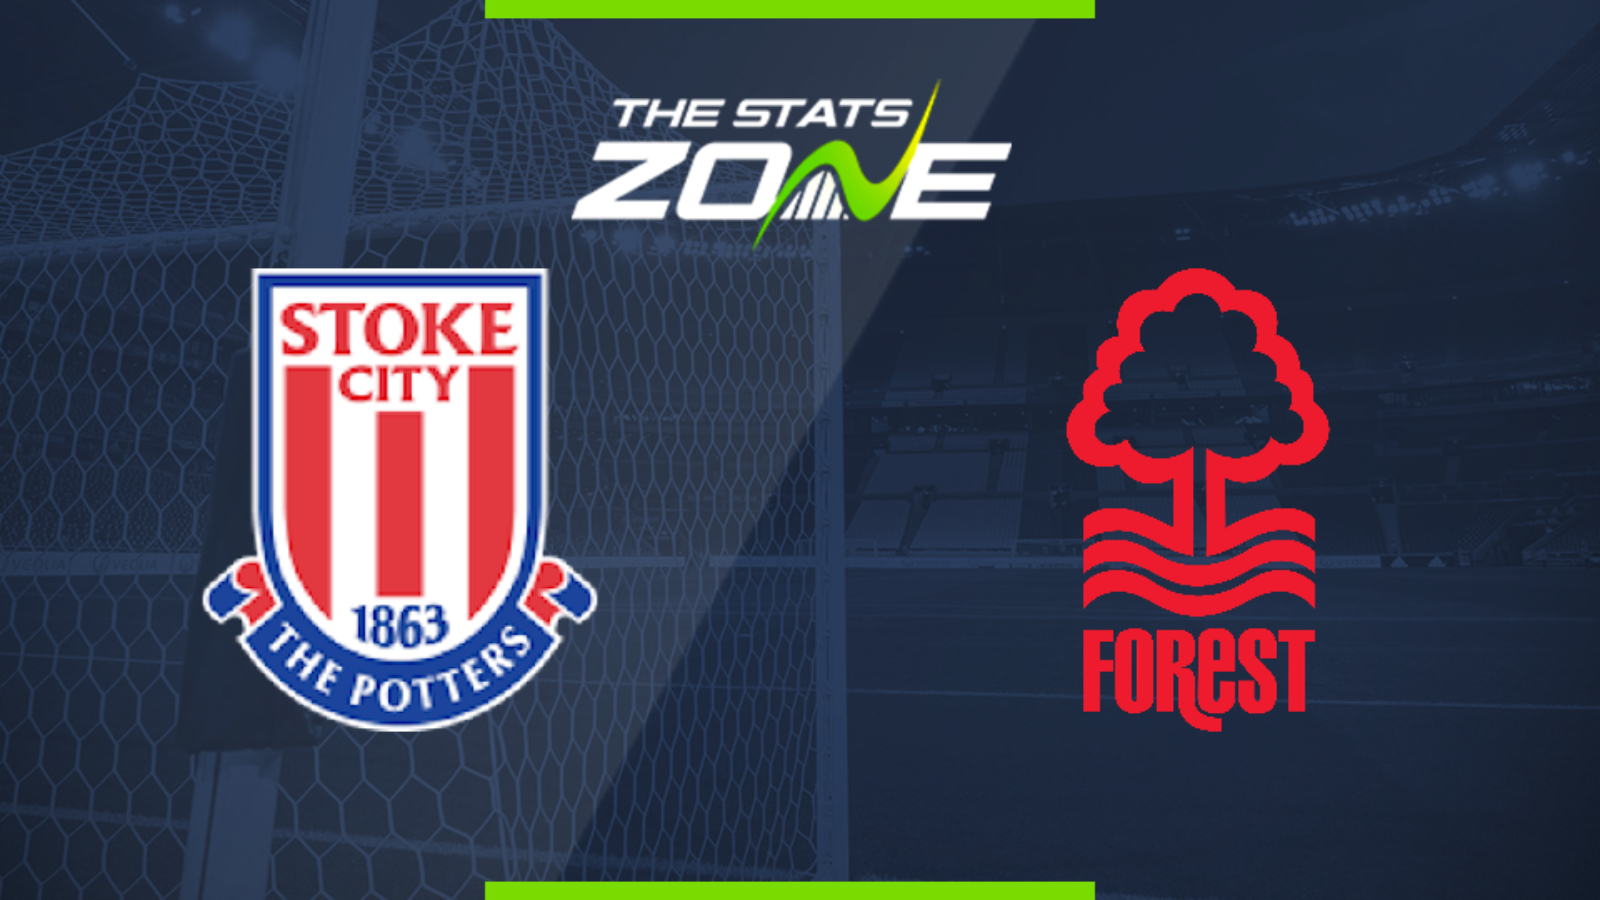 2019-20 Championship – Stoke vs Nottingham Forest Preview & Prediction - The Stats Zone